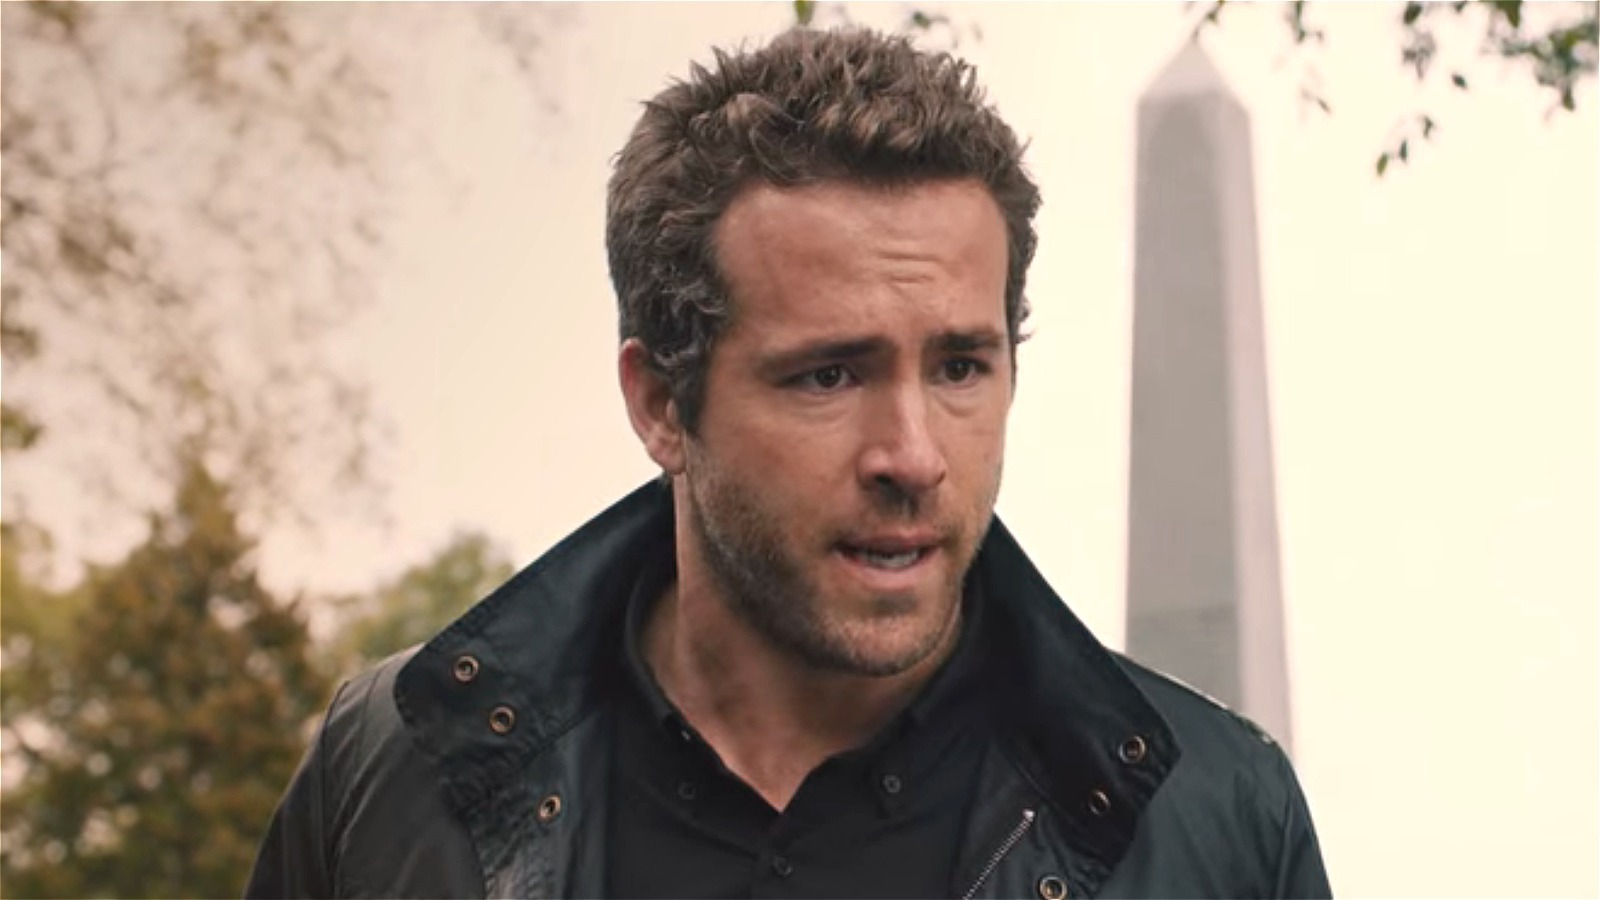 A Ryan Reynolds Movie Is Dominating On Streaming